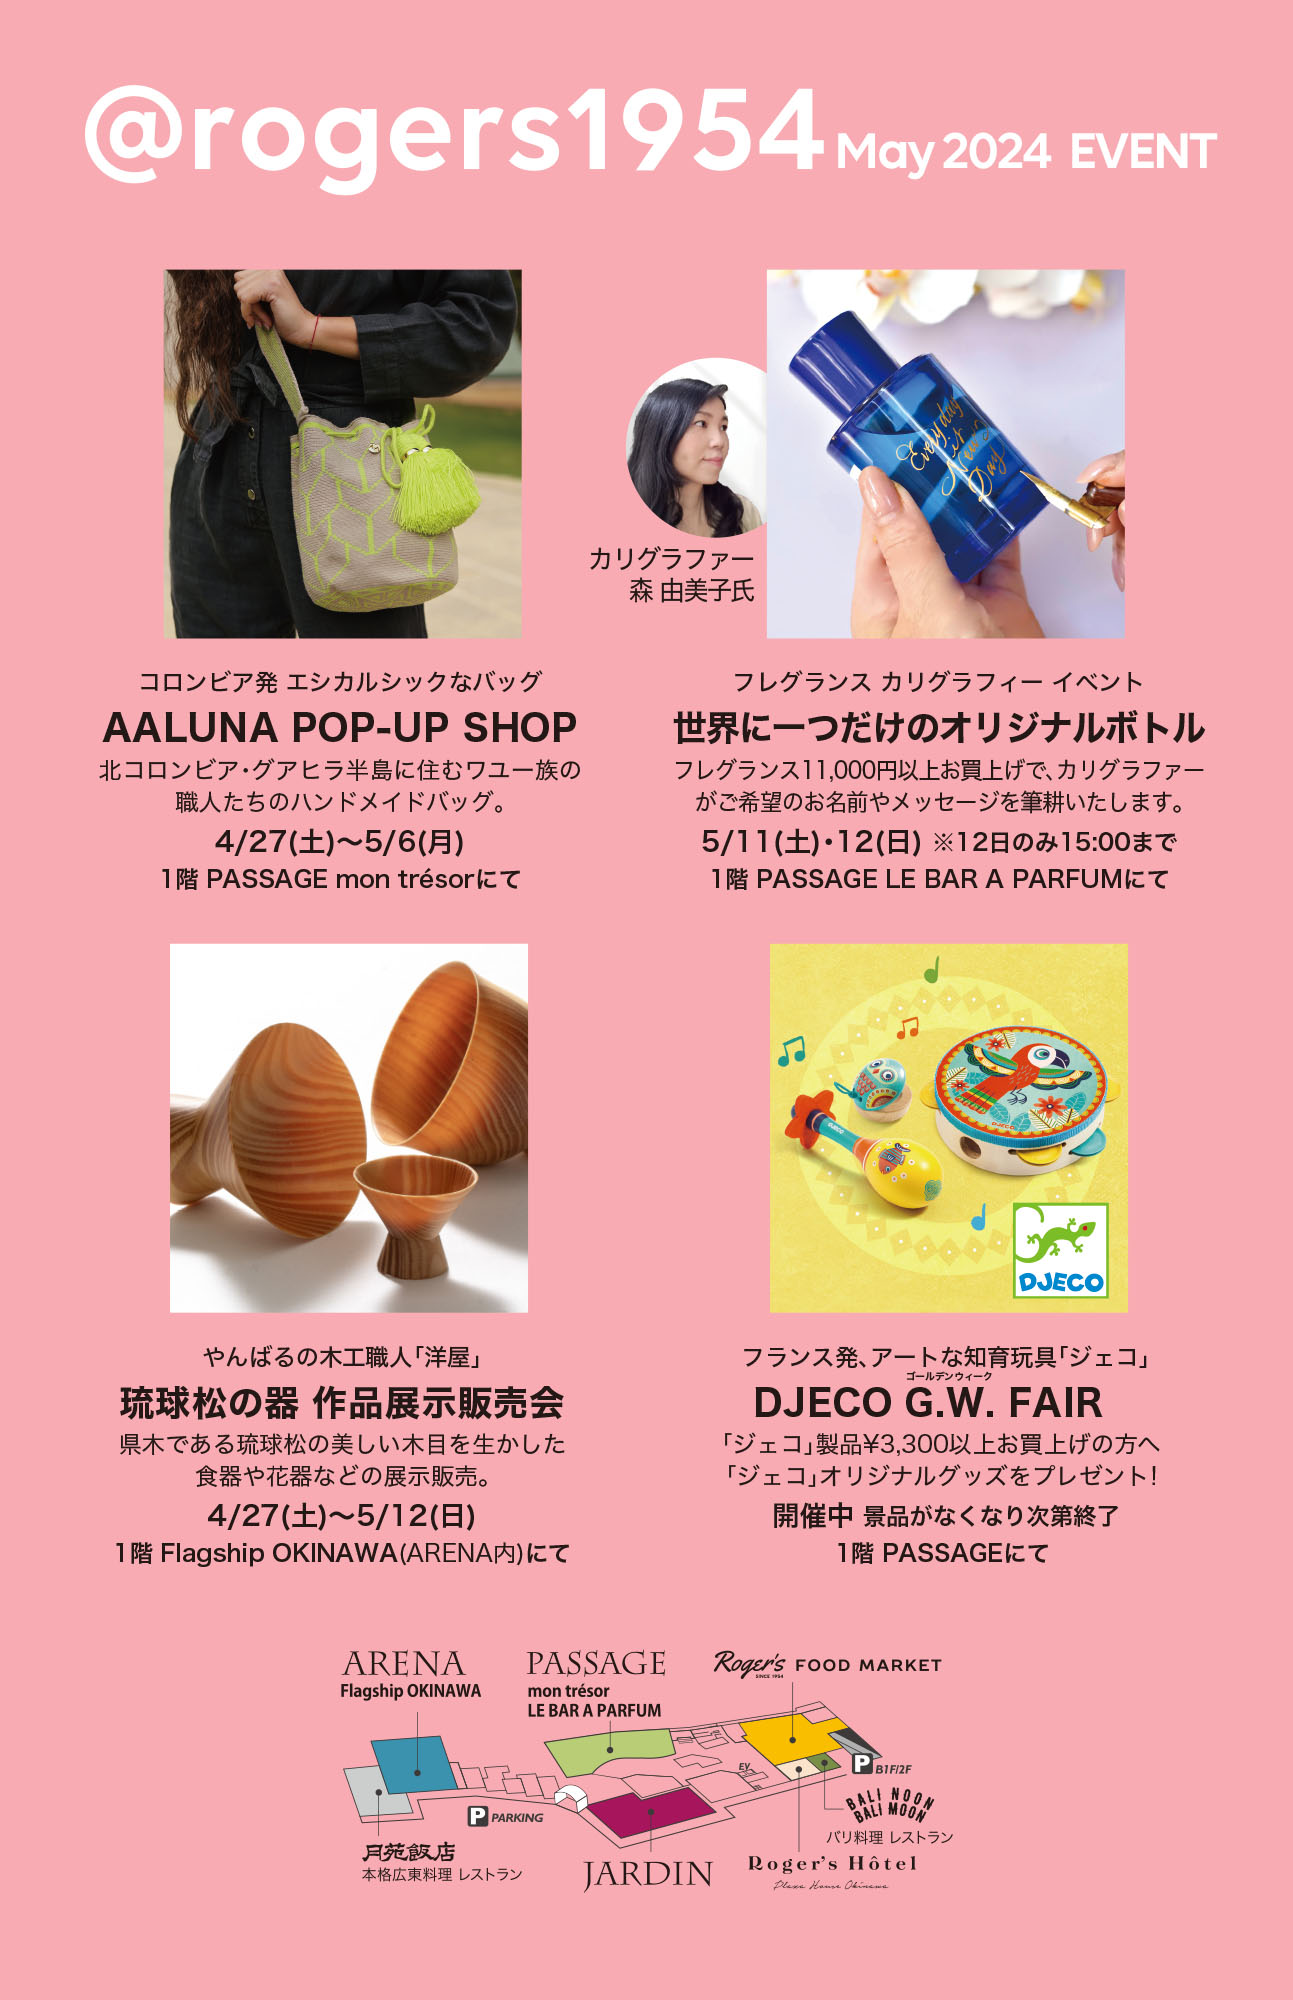 ROGER'S MAY 2024 EVENT AALUNA POP-UP / フレグランスカリグラフィーイベント / 琉球松の器展示販売会 / DJECO G.W. FAIR